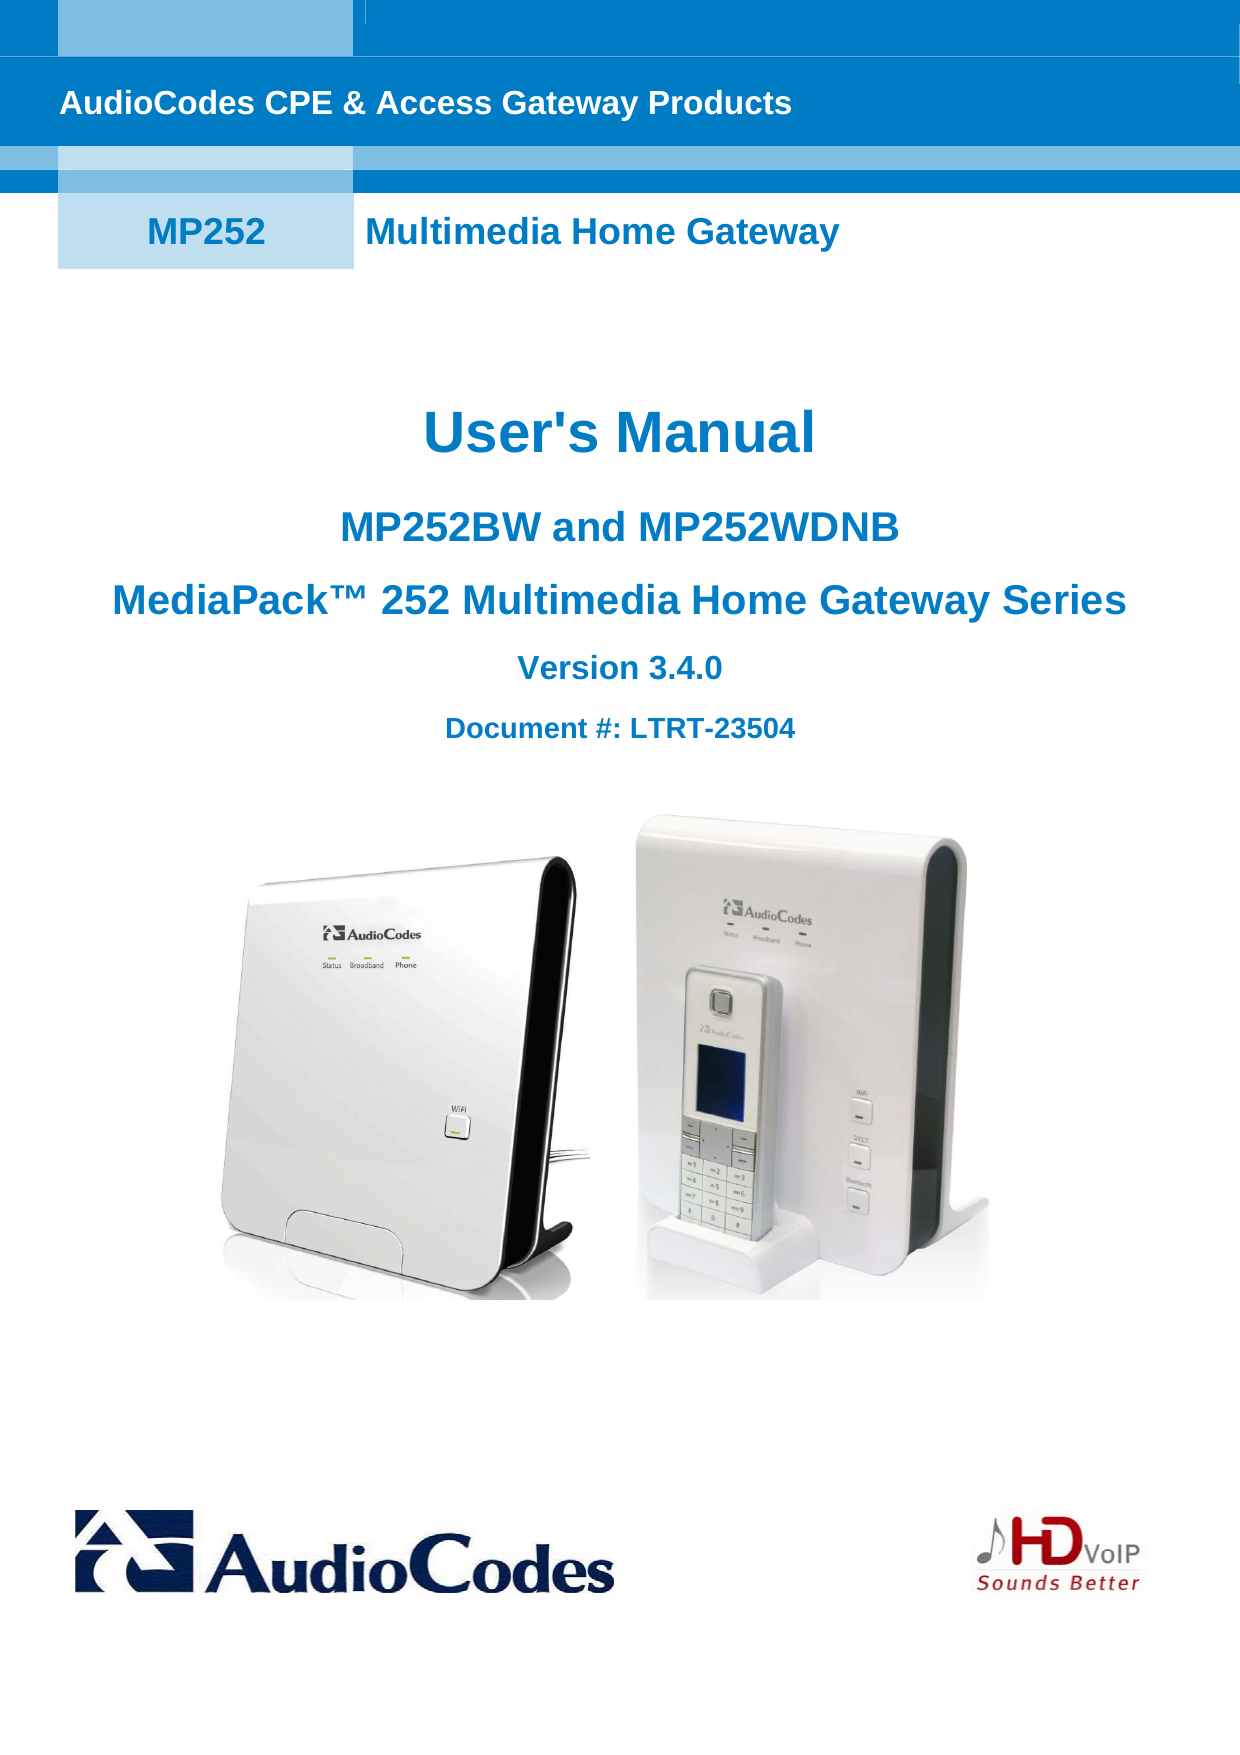    AudioCodes CPE &amp; Access Gateway Products     MP252  Multimedia Home Gateway  User&apos;s Manual  MP252BW and MP252WDNB MediaPack™ 252 Multimedia Home Gateway Series Version 3.4.0 Document #: LTRT-23504 